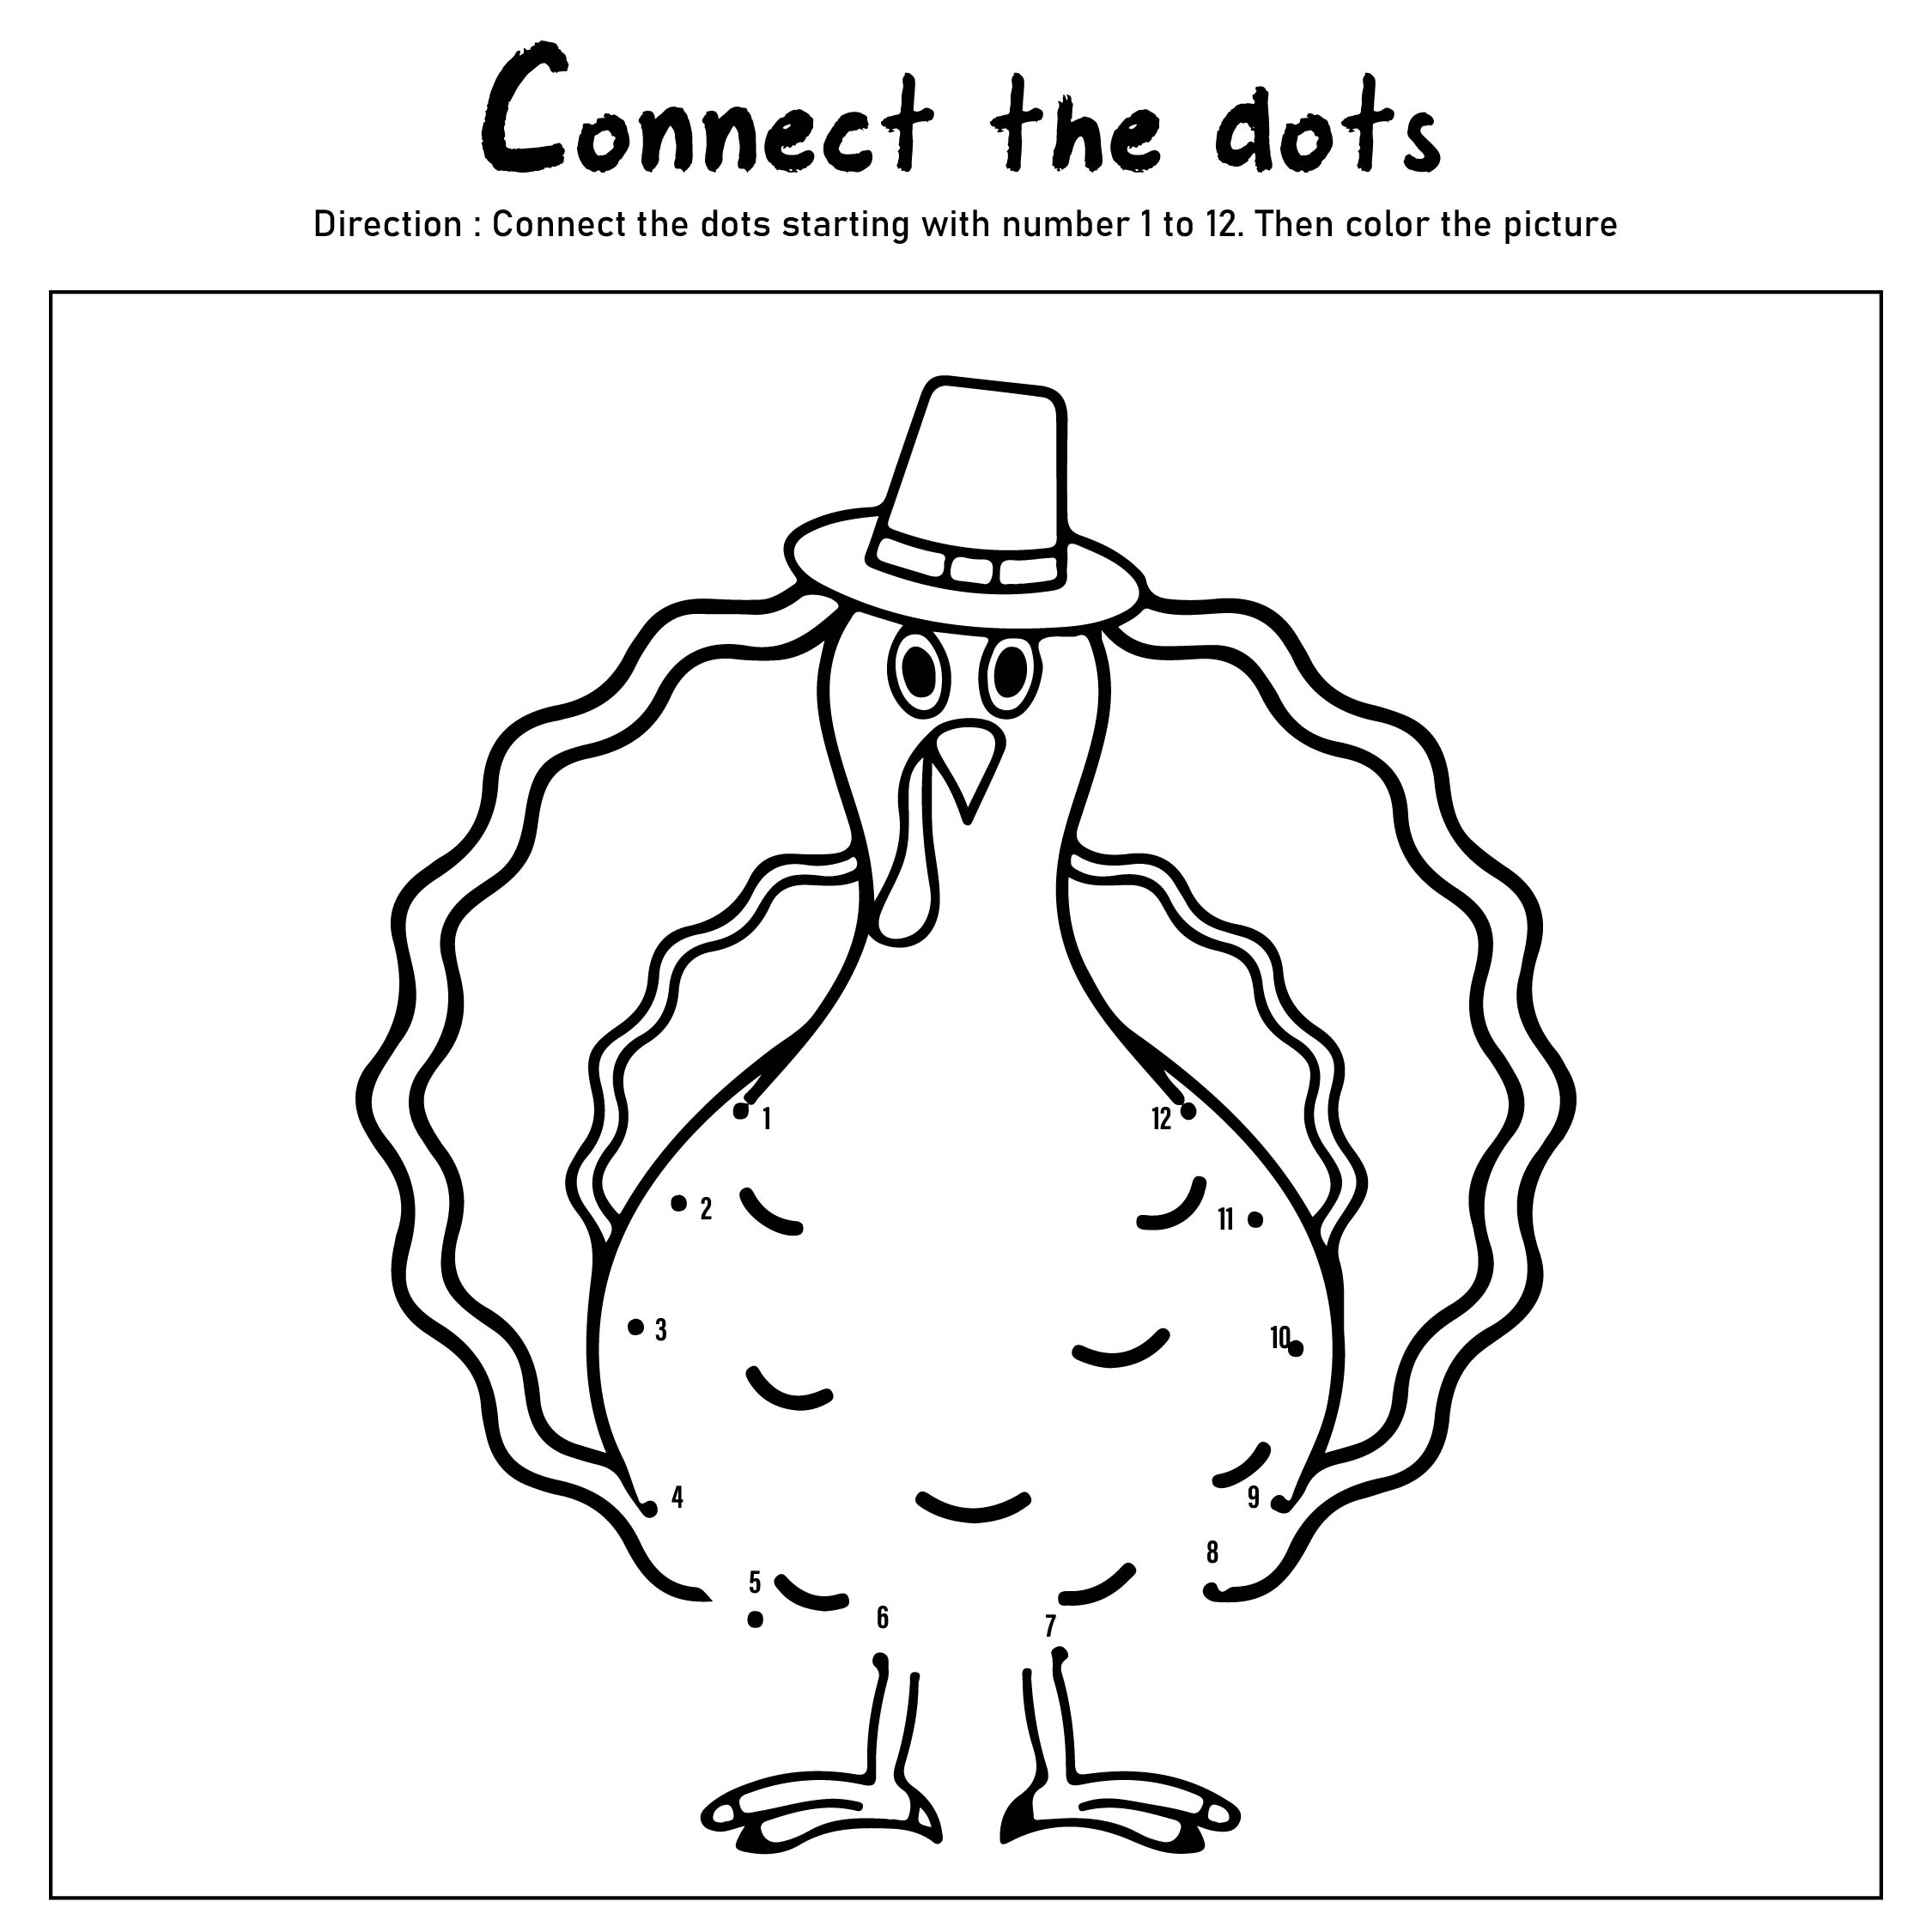 Printable Thanksgiving Activity Worksheets